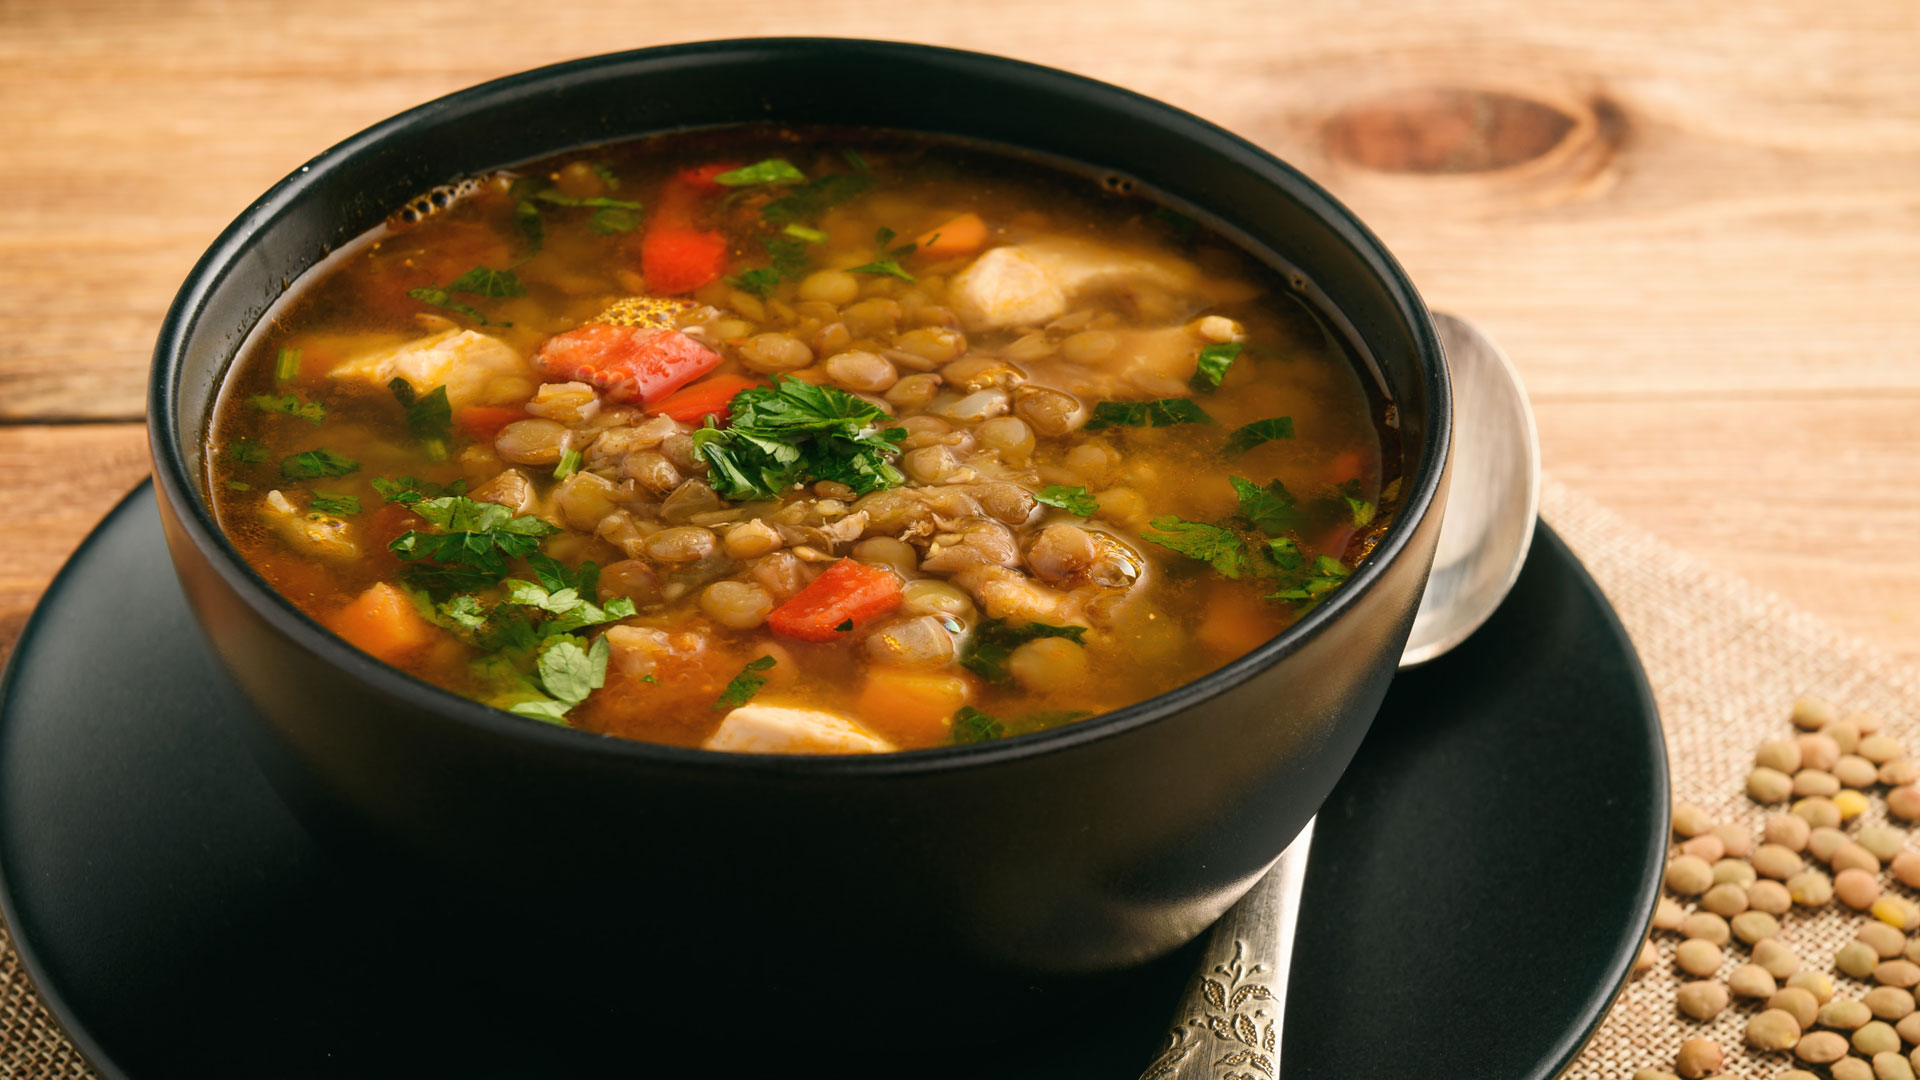 Chicken and lentil soup